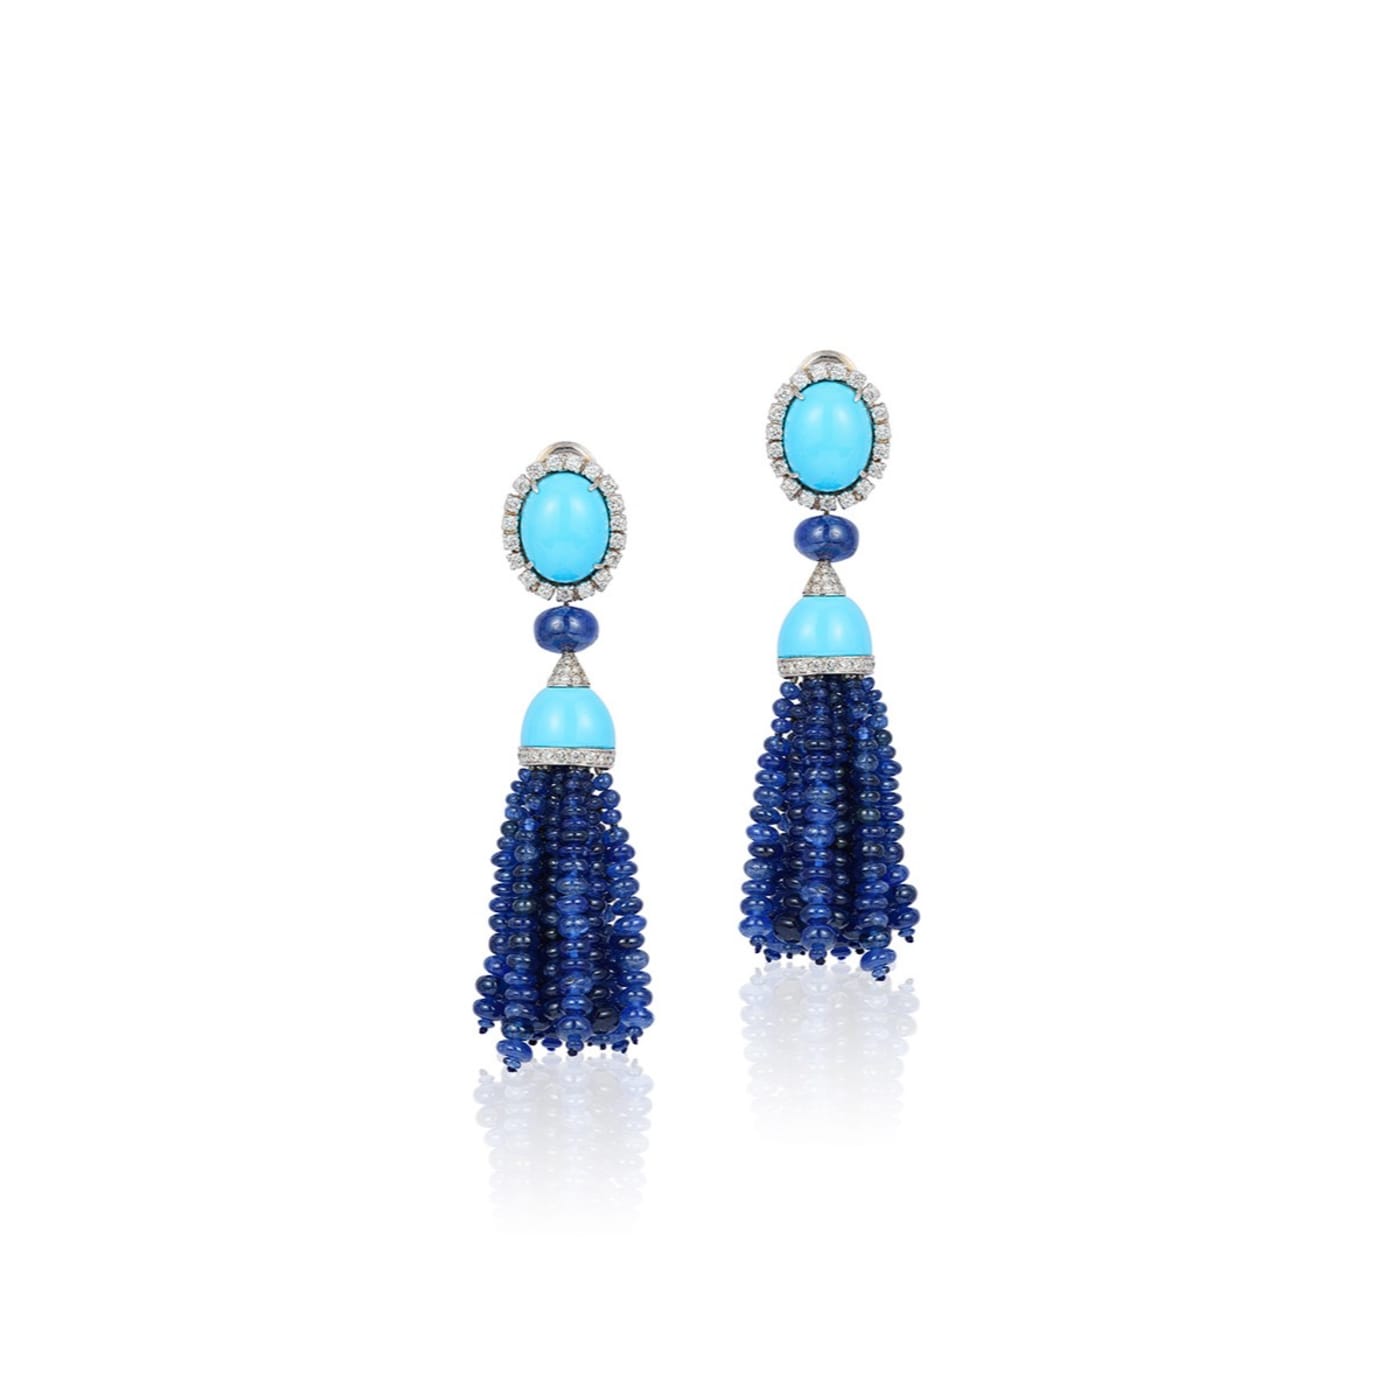 Everything You Need to Know About Tassel Earrings